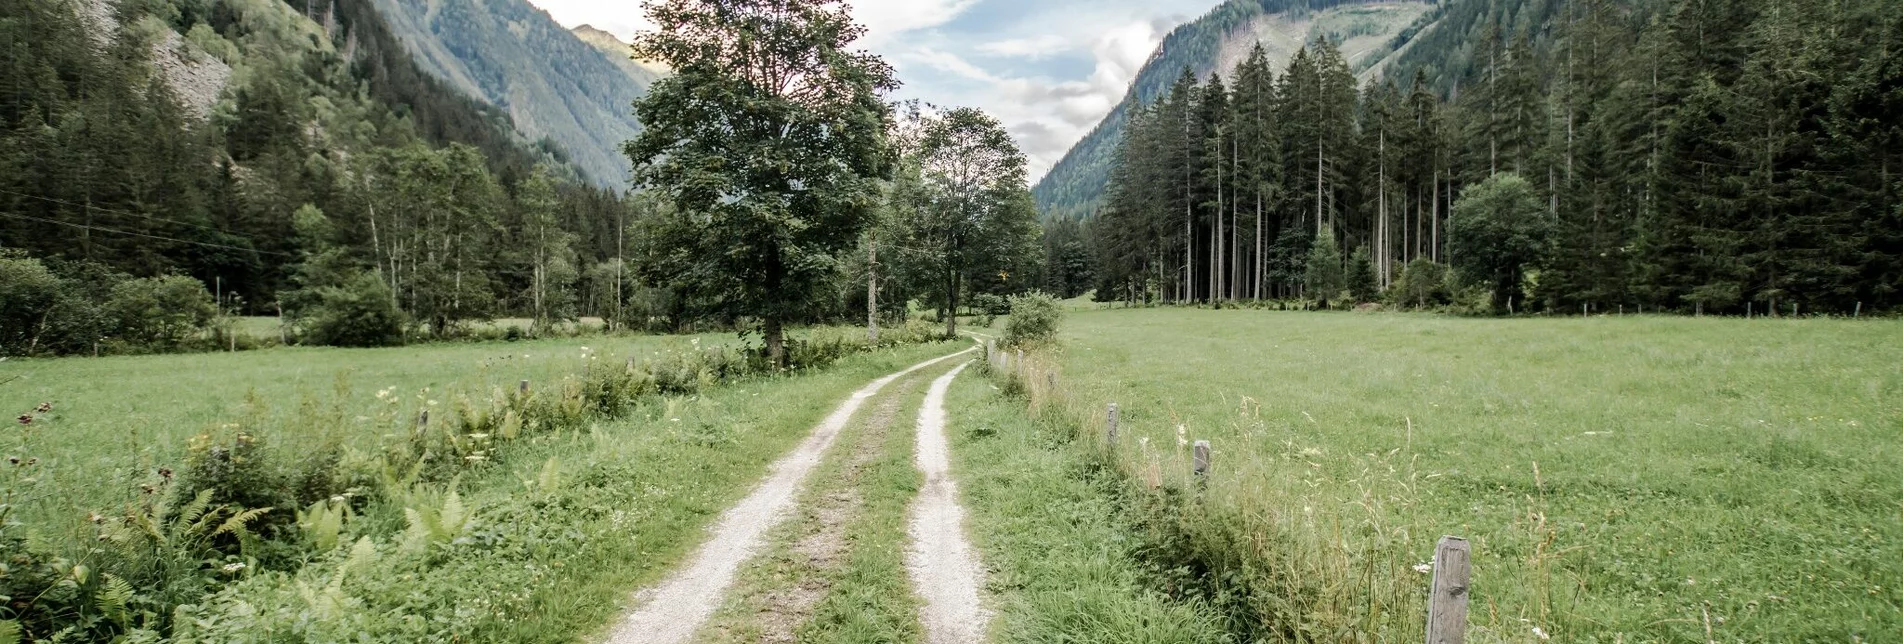 Hiking route Miners' Trail - Touren-Impression #1 | © Tourismusverband Schladming